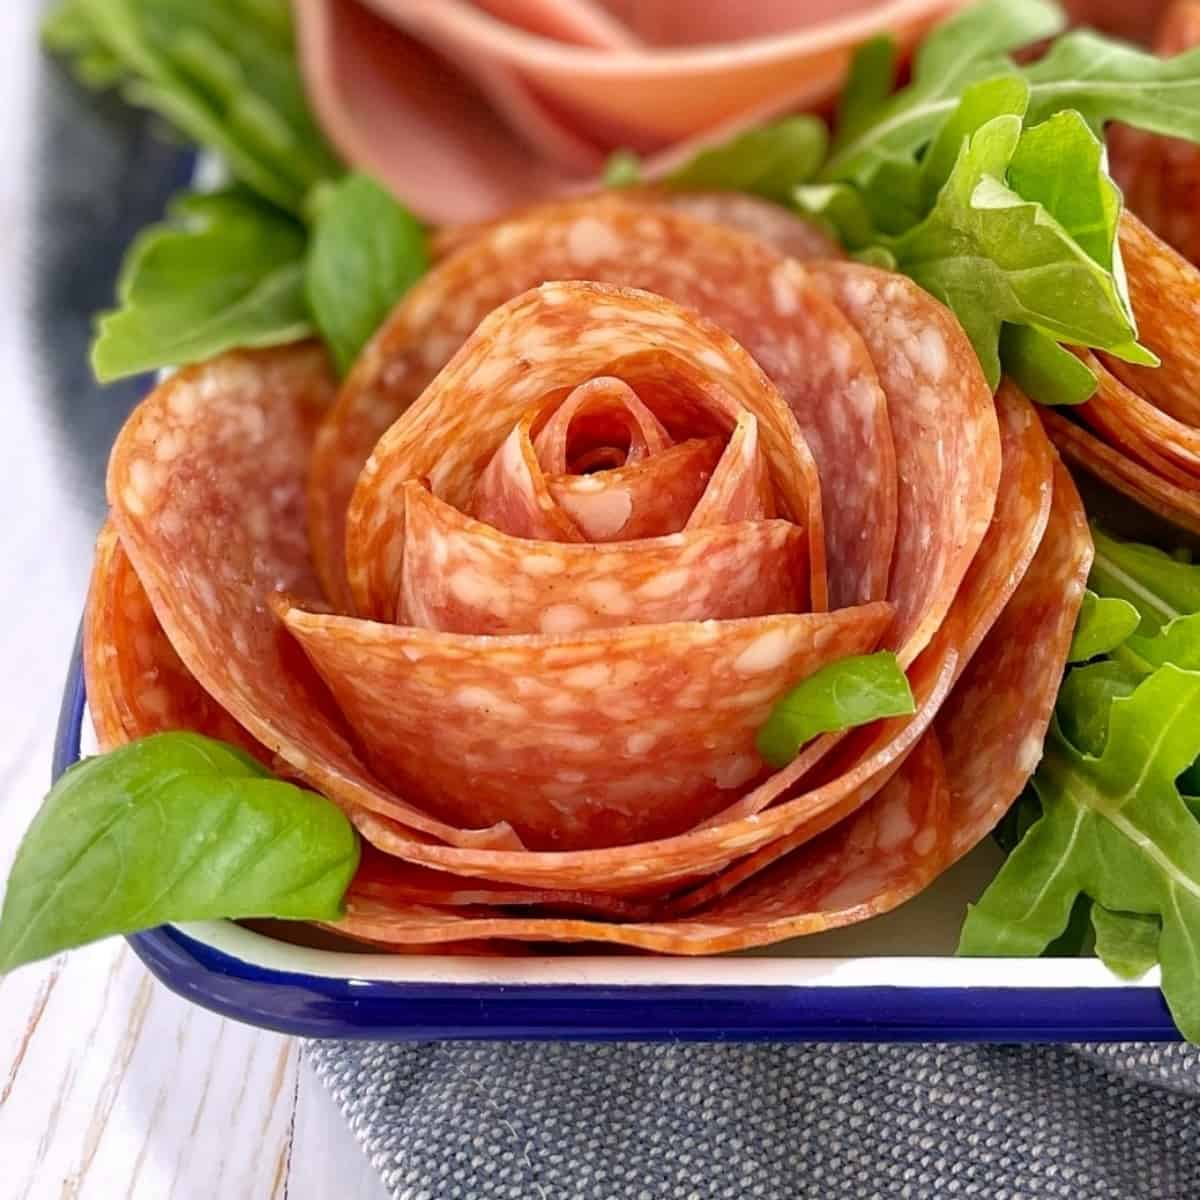 Pepperoni folded into the shape of a rose in a white tray with basil leaves and arugula.